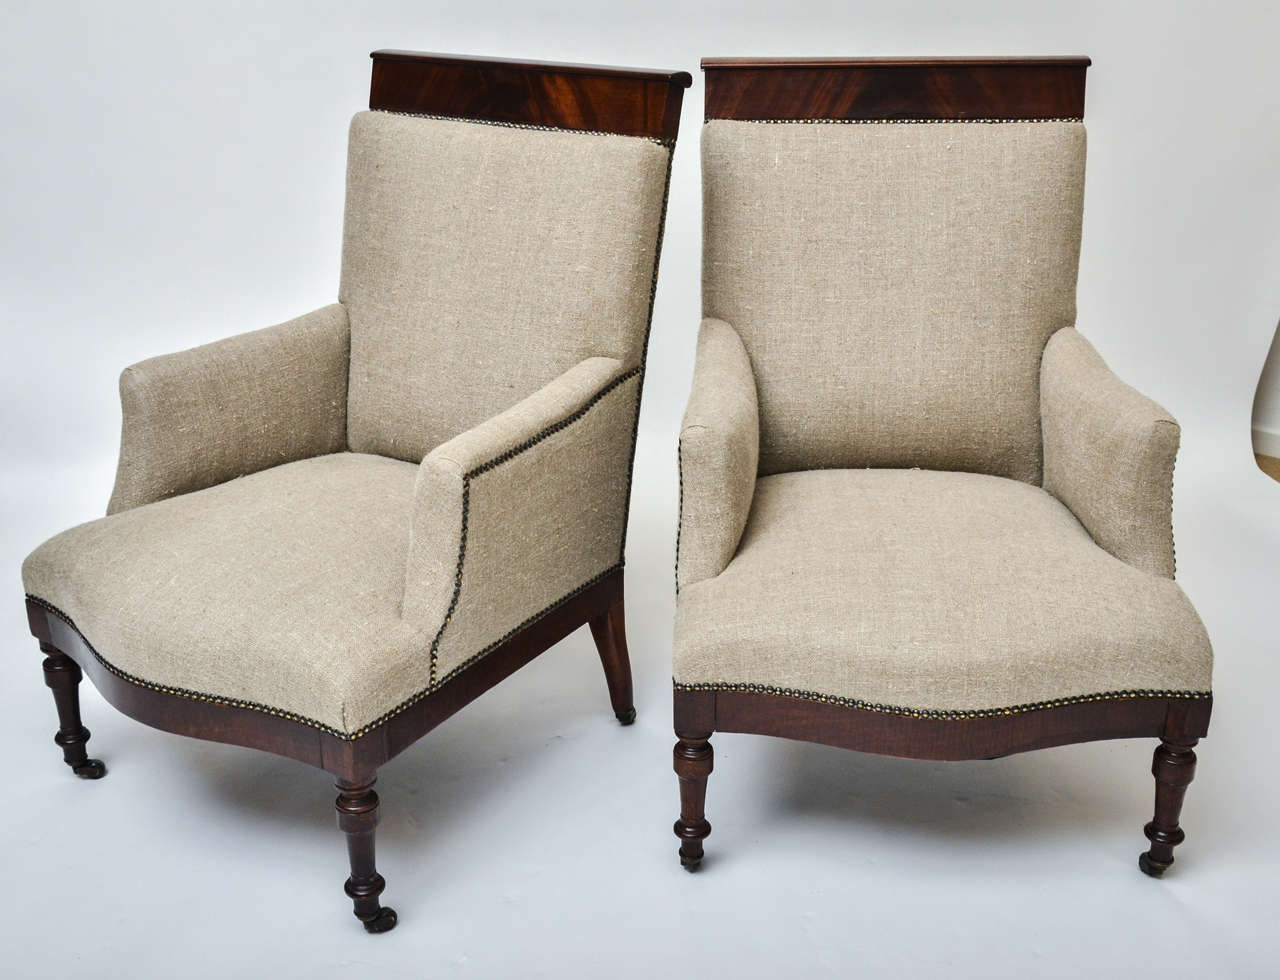 A pair of 19th century English upholstered armchairs with mahogany back rail, upholstered in beige linen, brass studs.